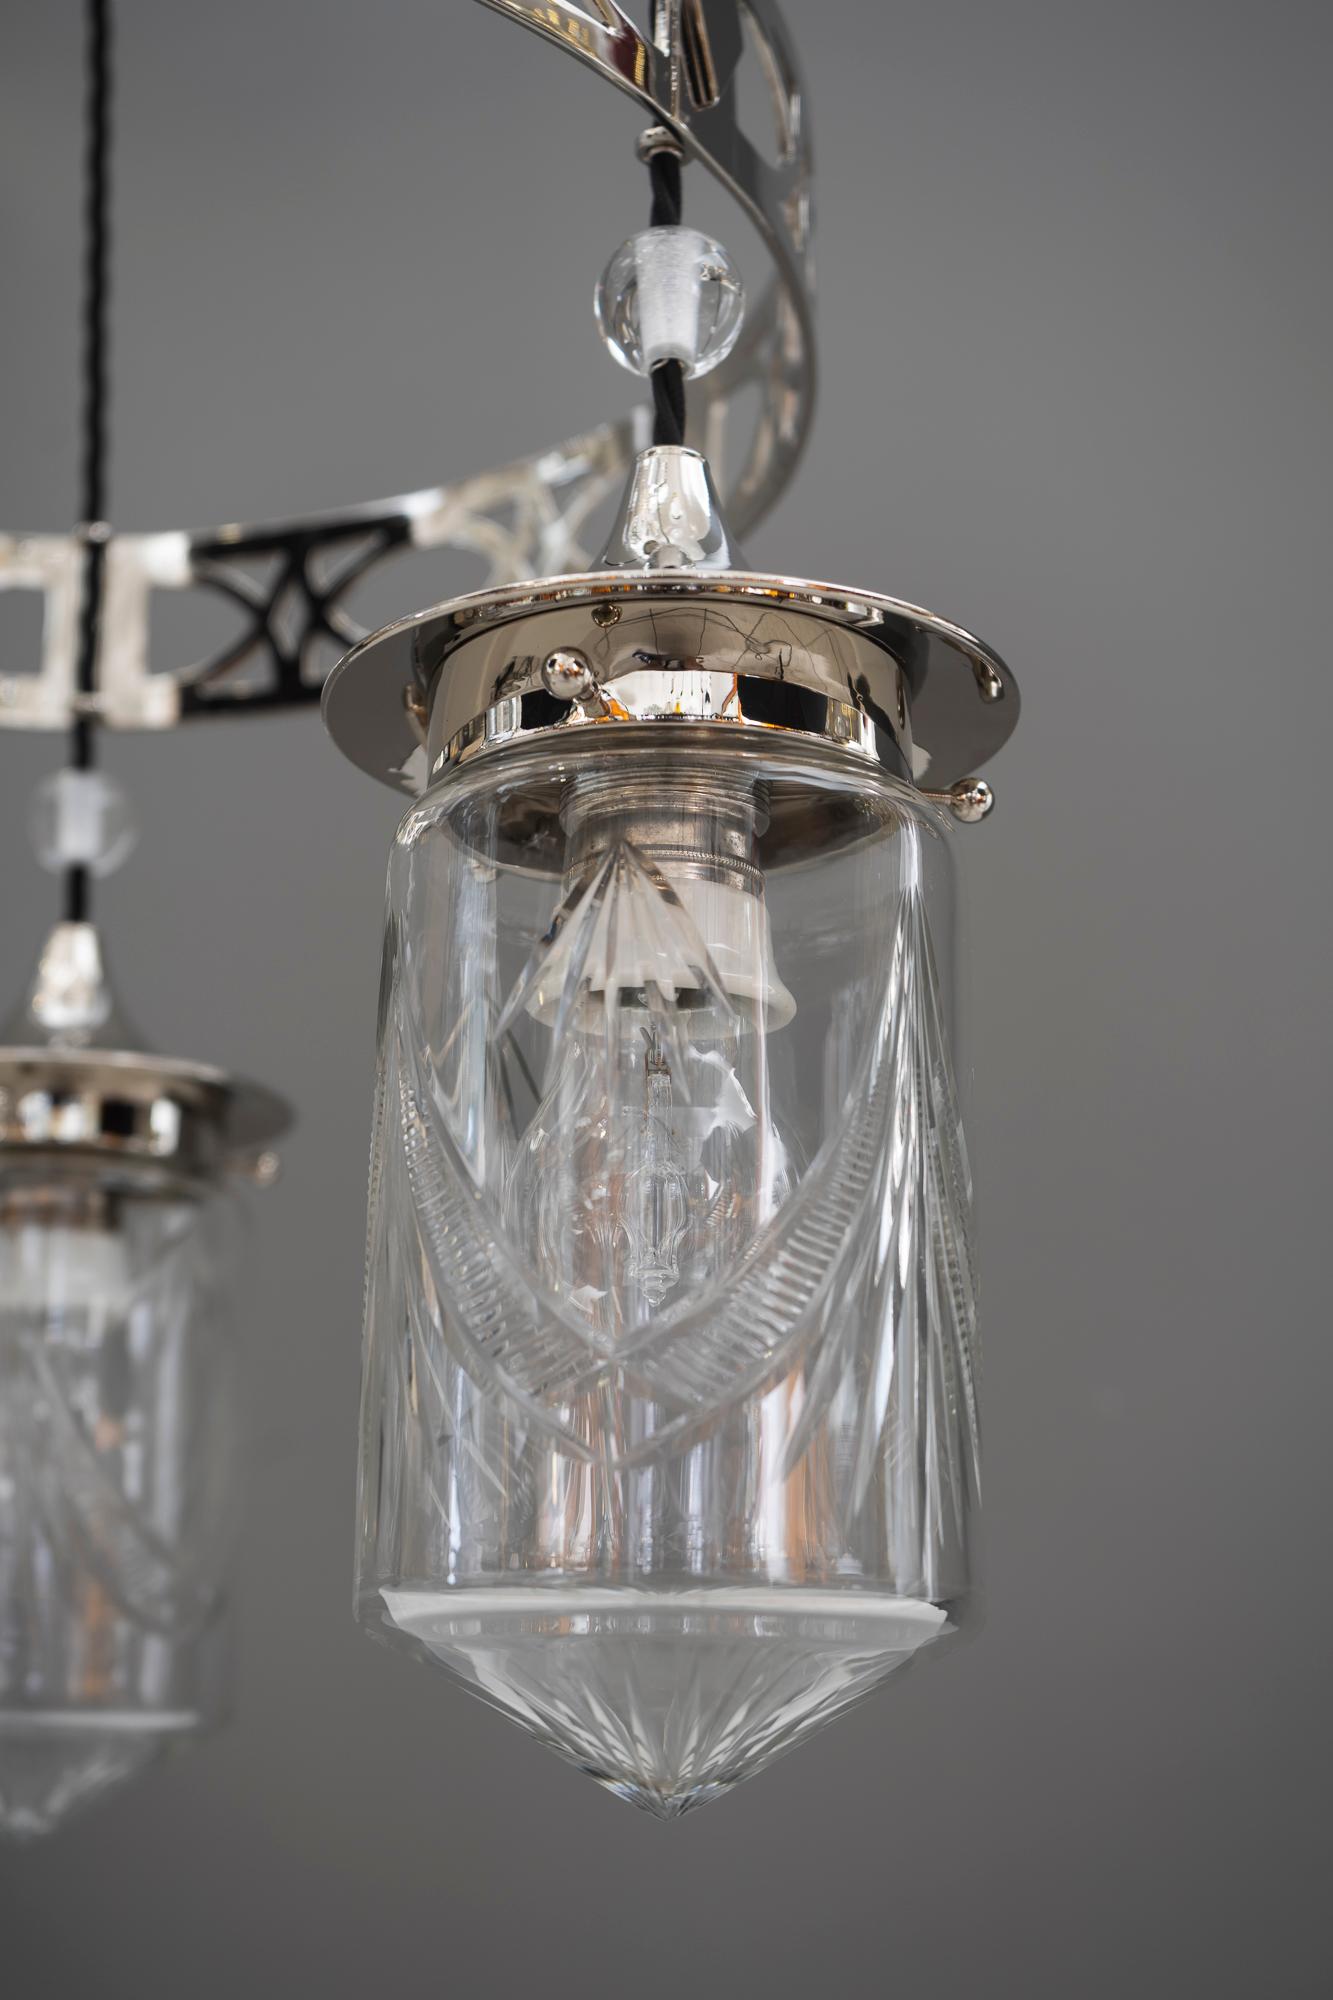 Nickel-Plated Art Deco Chandelier with Original Cut-Glasses, circa 1920s For Sale 2